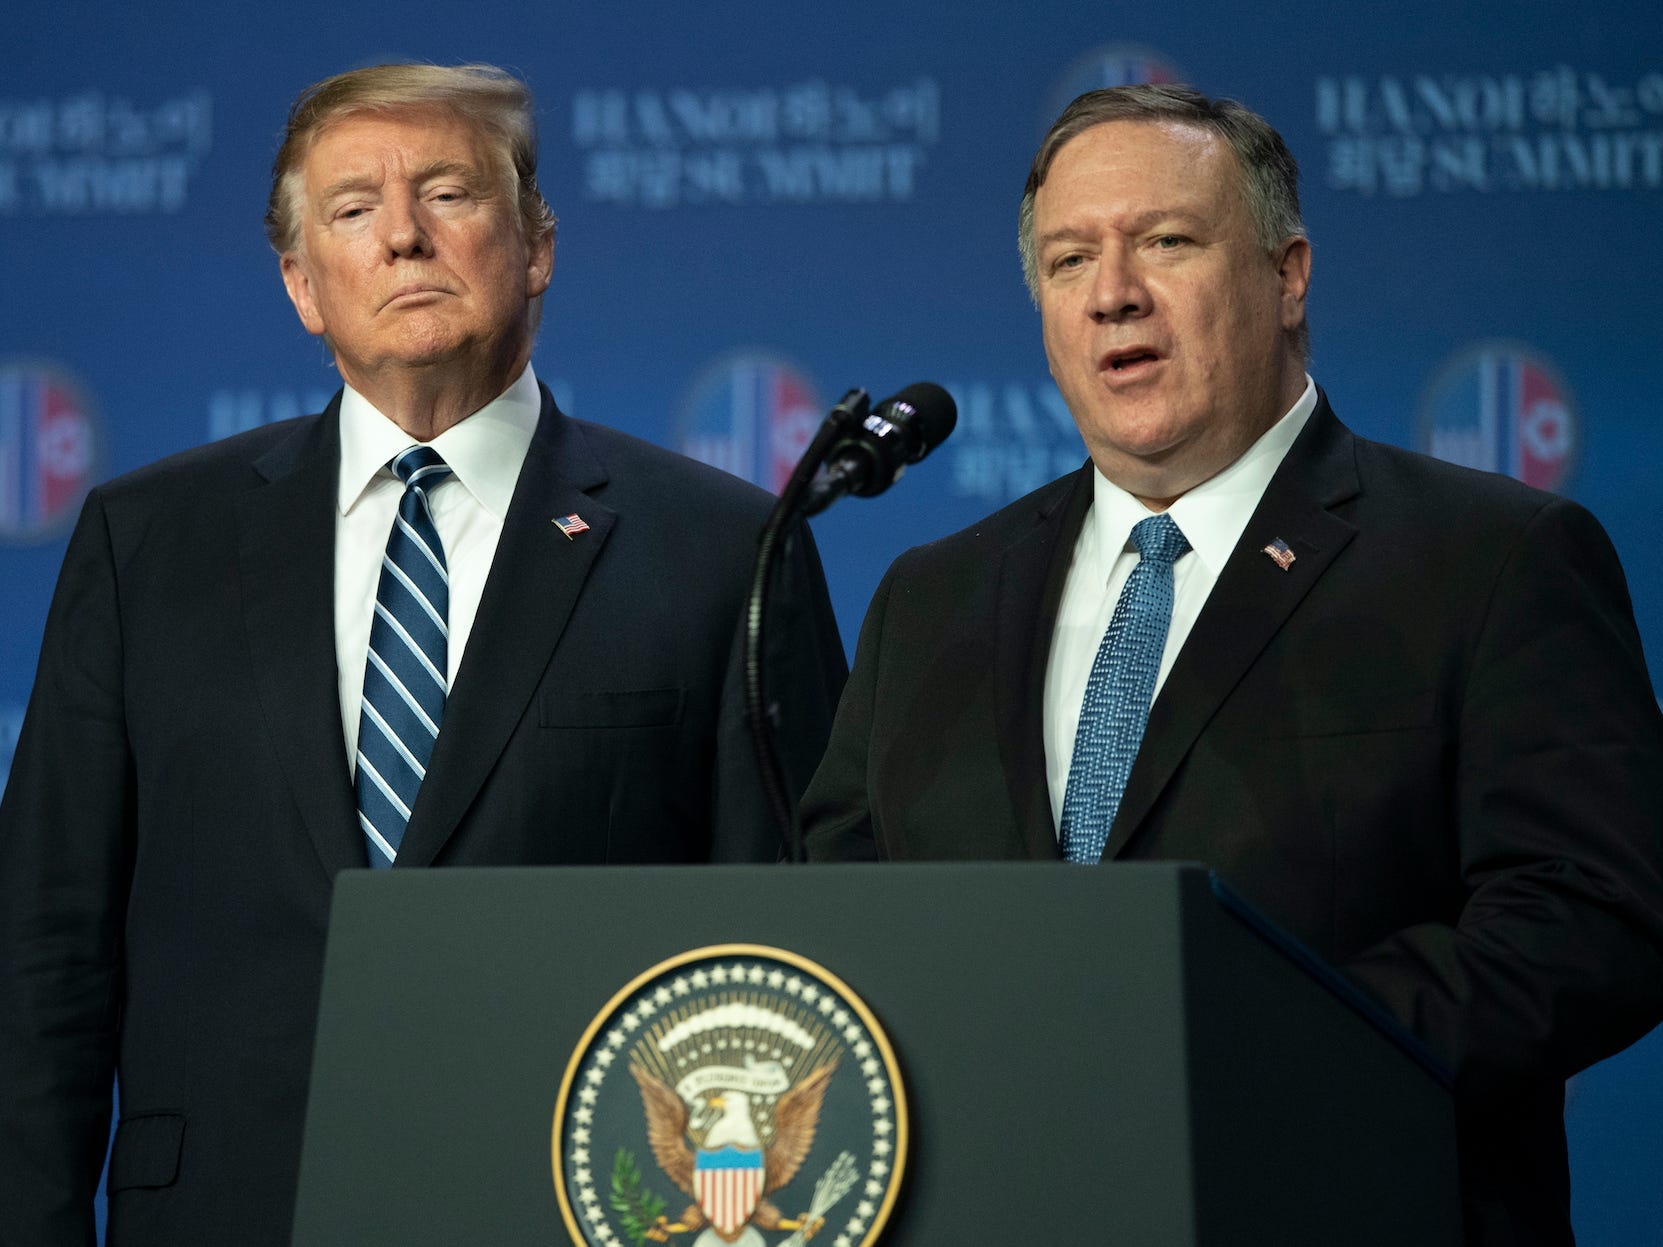 United States President Donald Trump (Left) with Secretary of State Mike Pompeo (Right) 